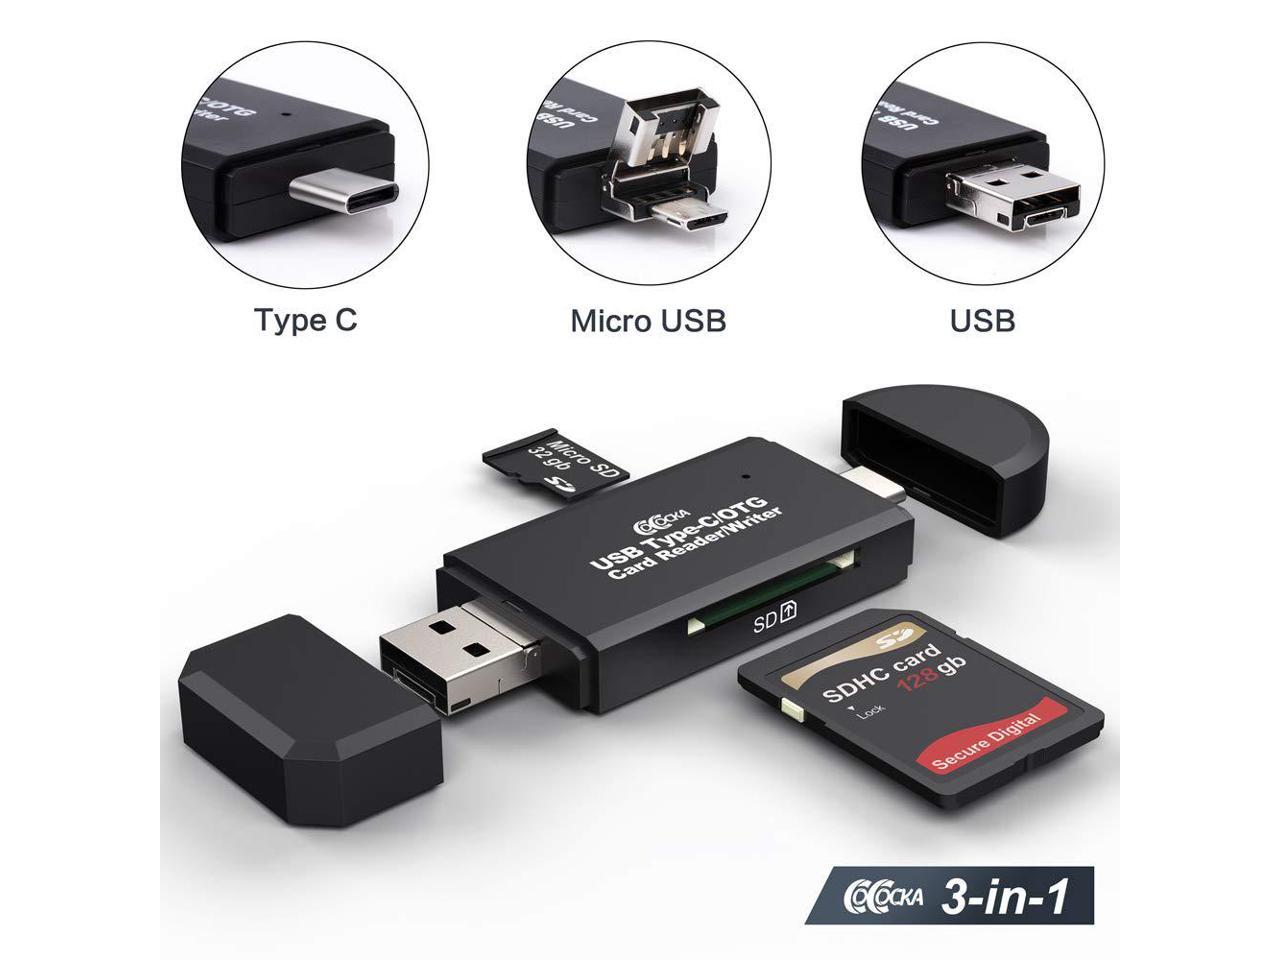 Gotd Ultra Slim USB 3.0 SD / Micro SD Card Reader Adapter Micro USB OTG / USB C OTG Adapter for PC / Laptop / Smartphones/ Tablets Silver TF / SD Card Reader, 2 Pack